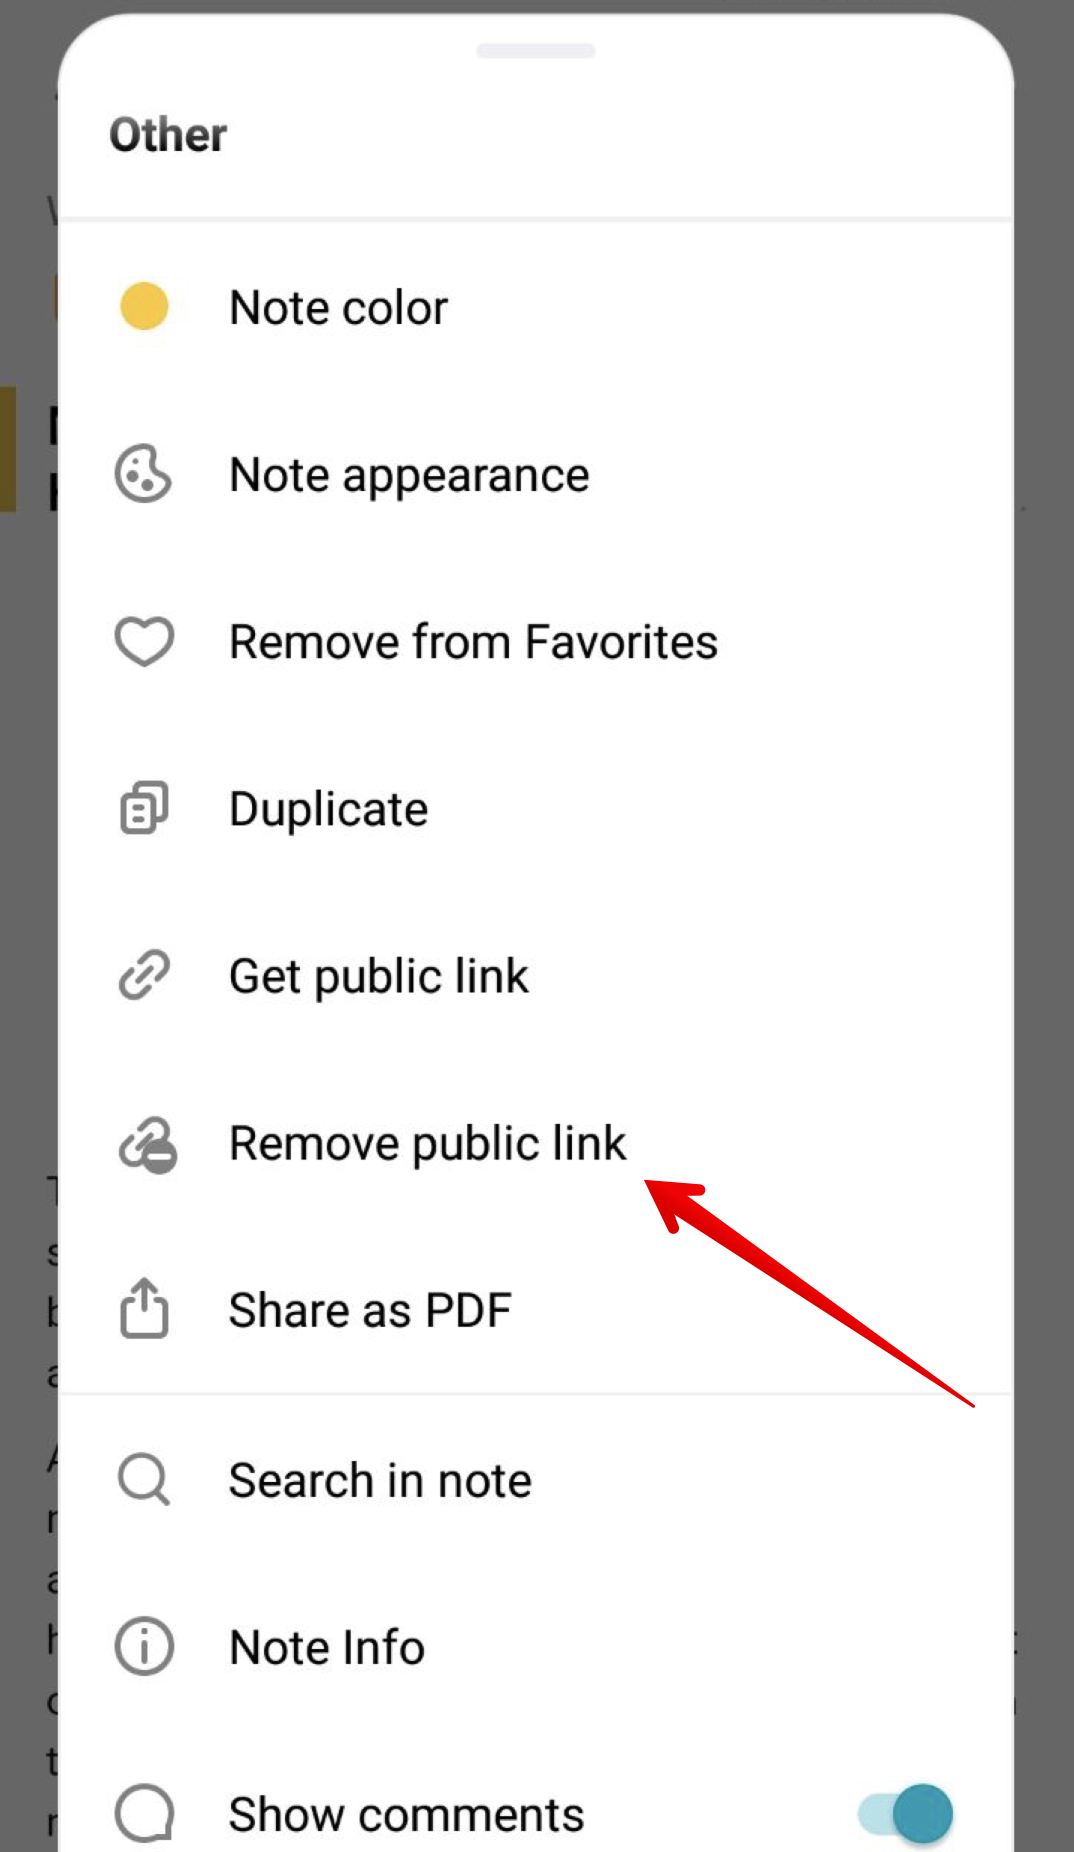 To remove a previously created shared link to a page in the mobile app, use one of the following ways.